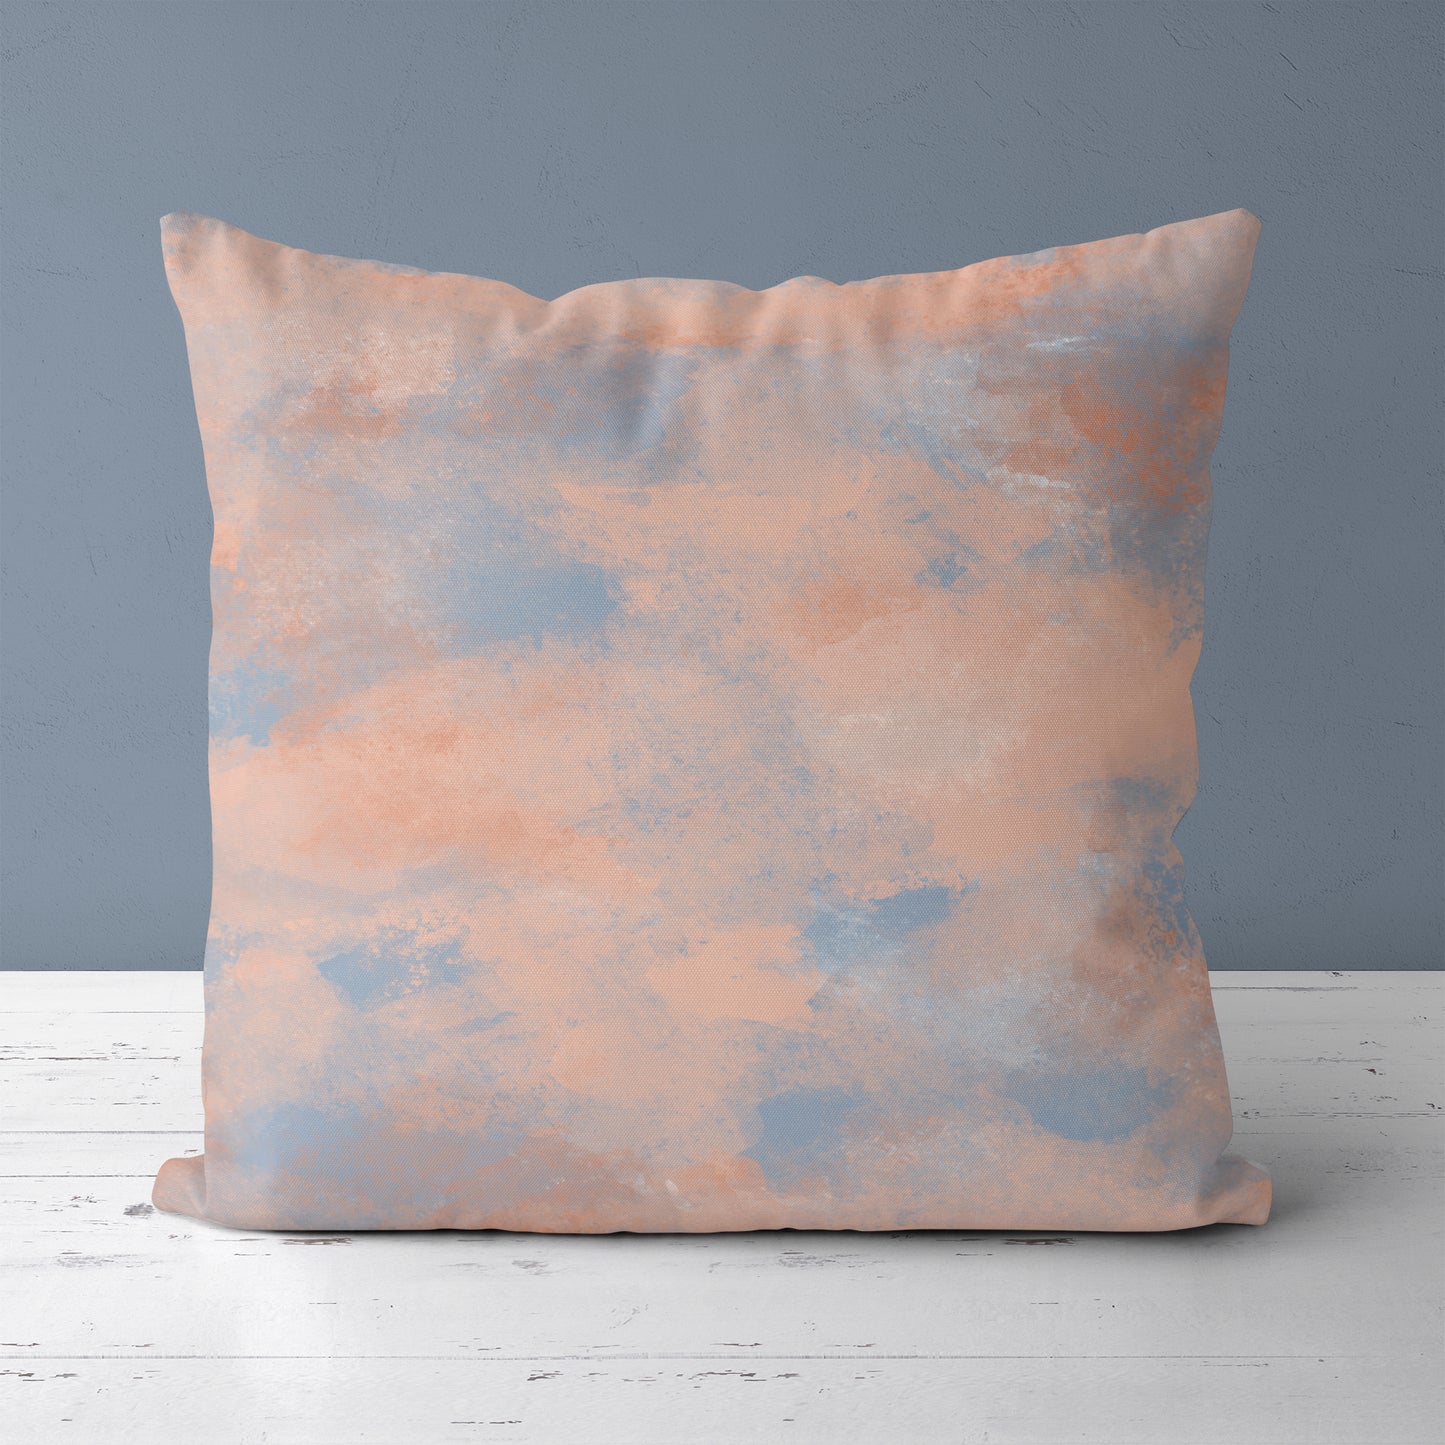 Throw Pillow with Bright Pastel Paintbrush